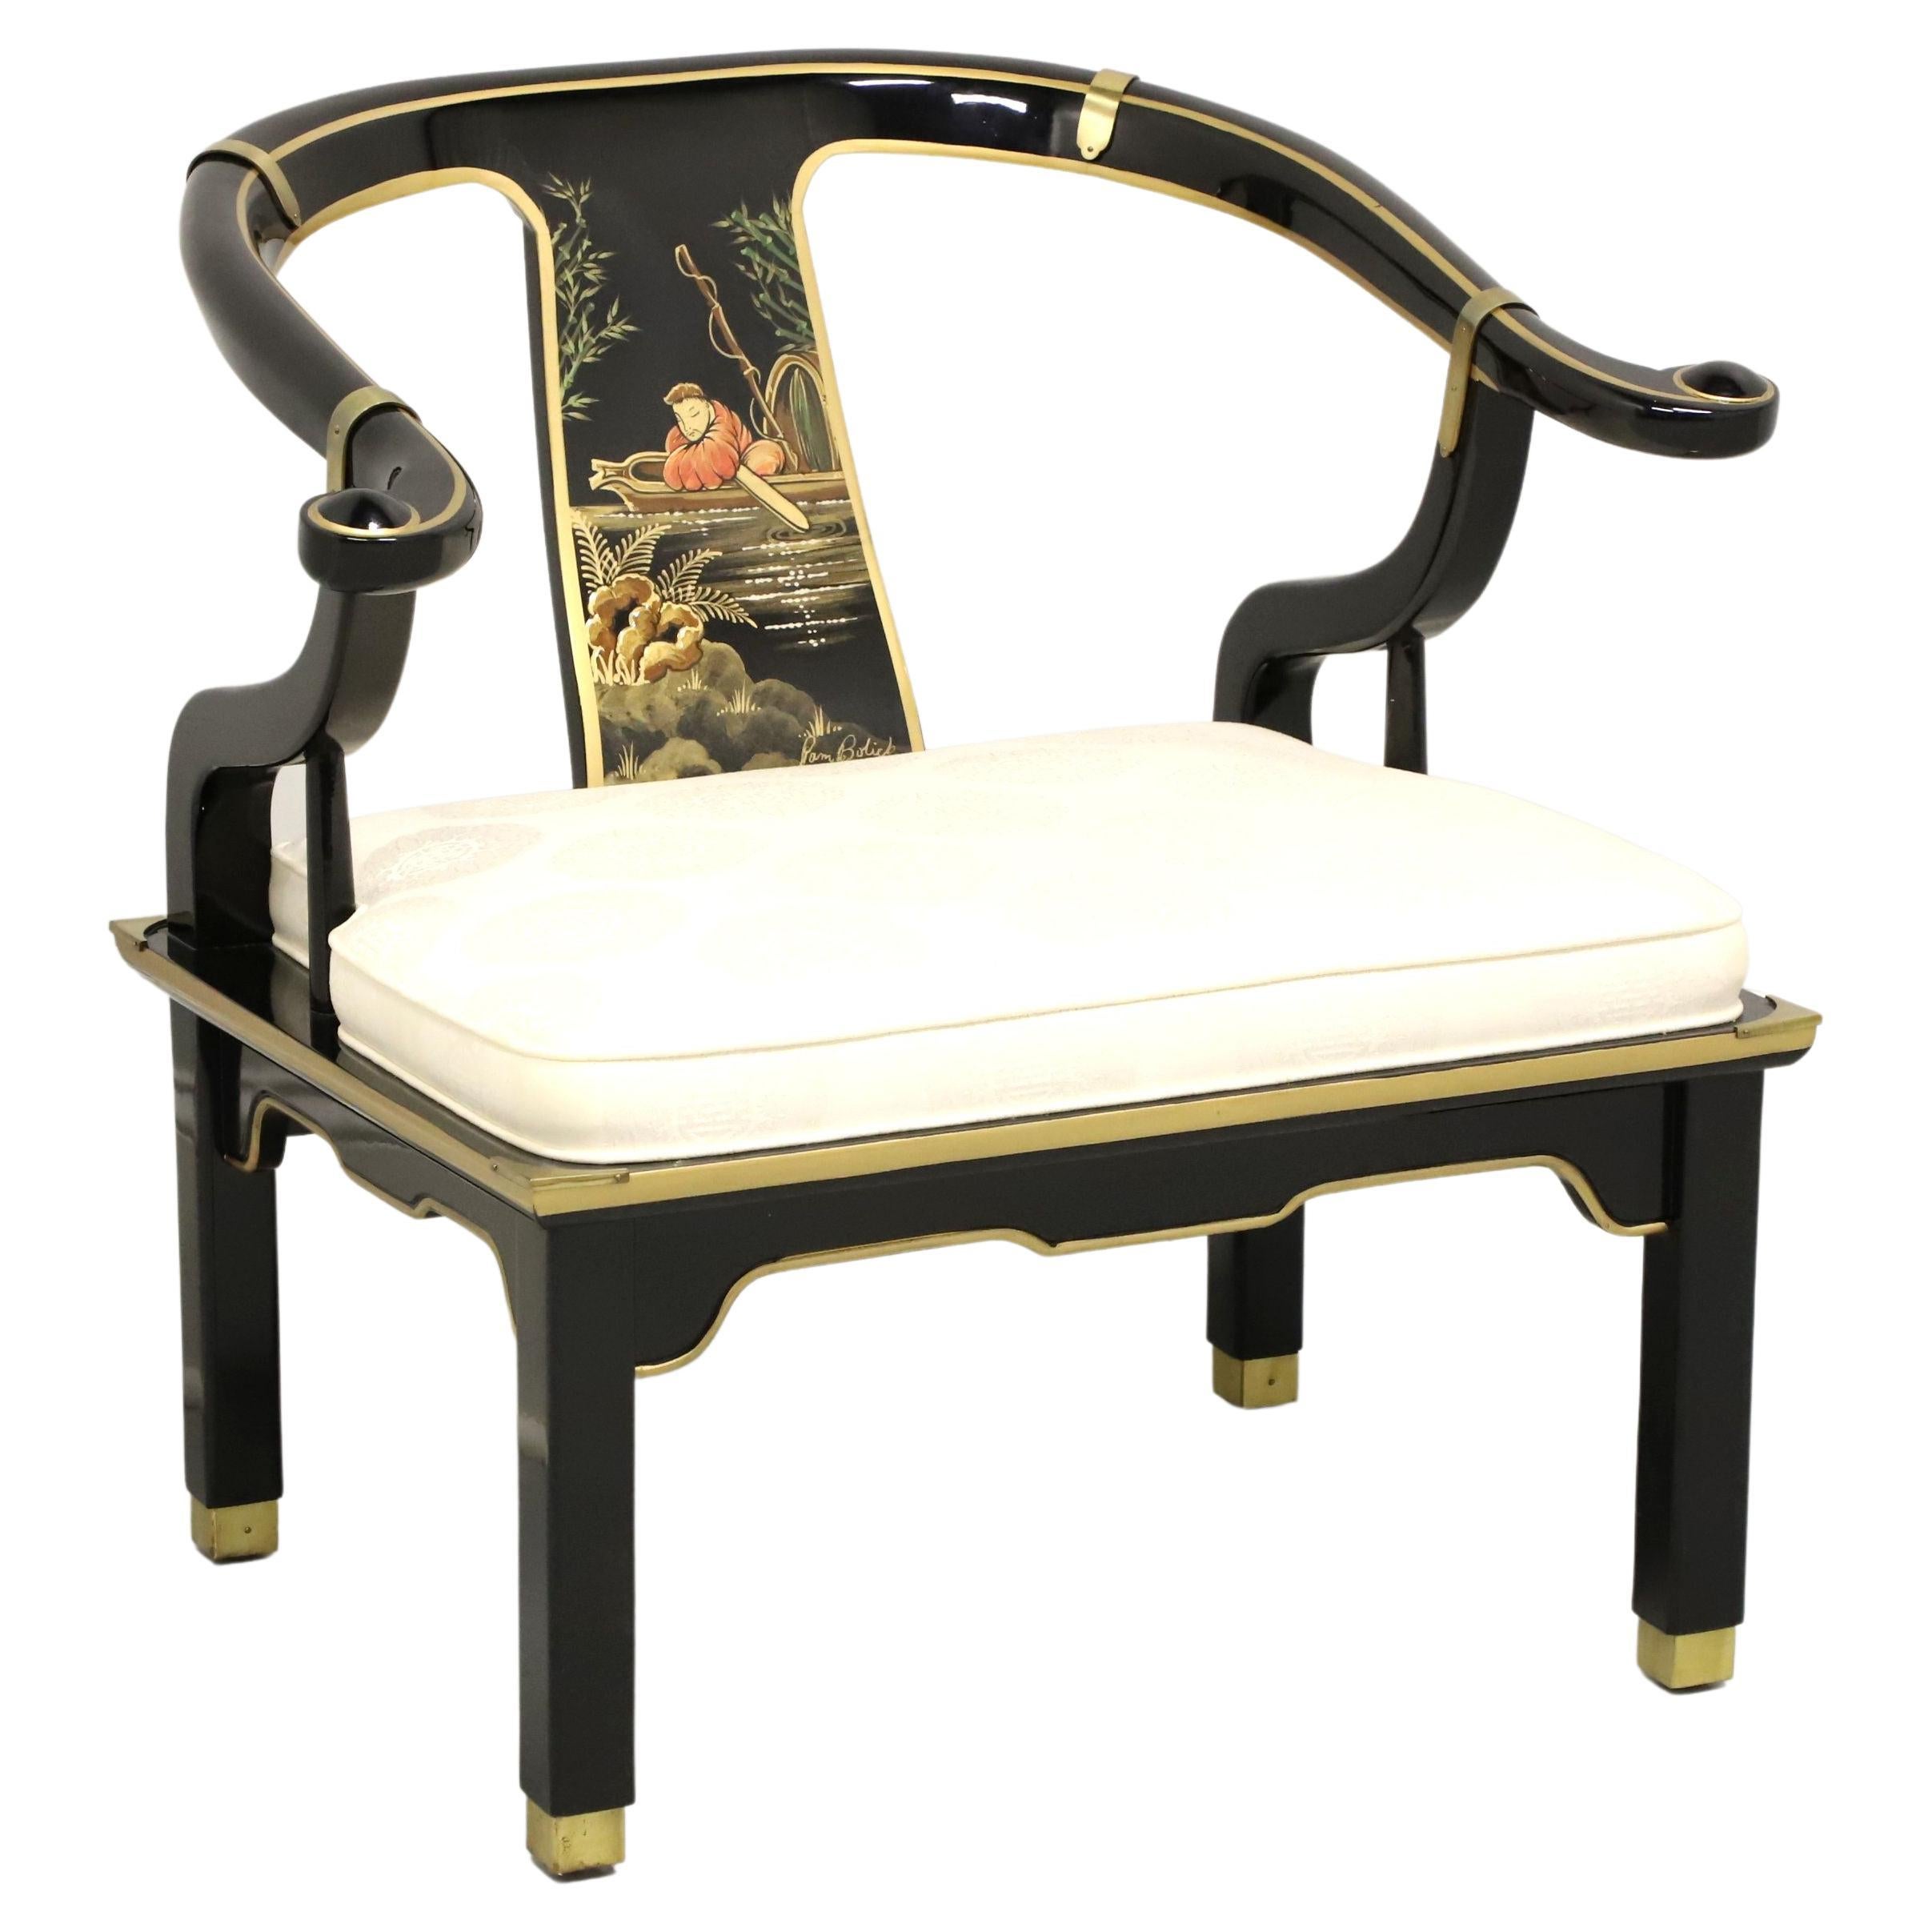 CENTURY Black Lacquer & Brass Chinoiserie Ming Hand Painted Horseshoe Armchair